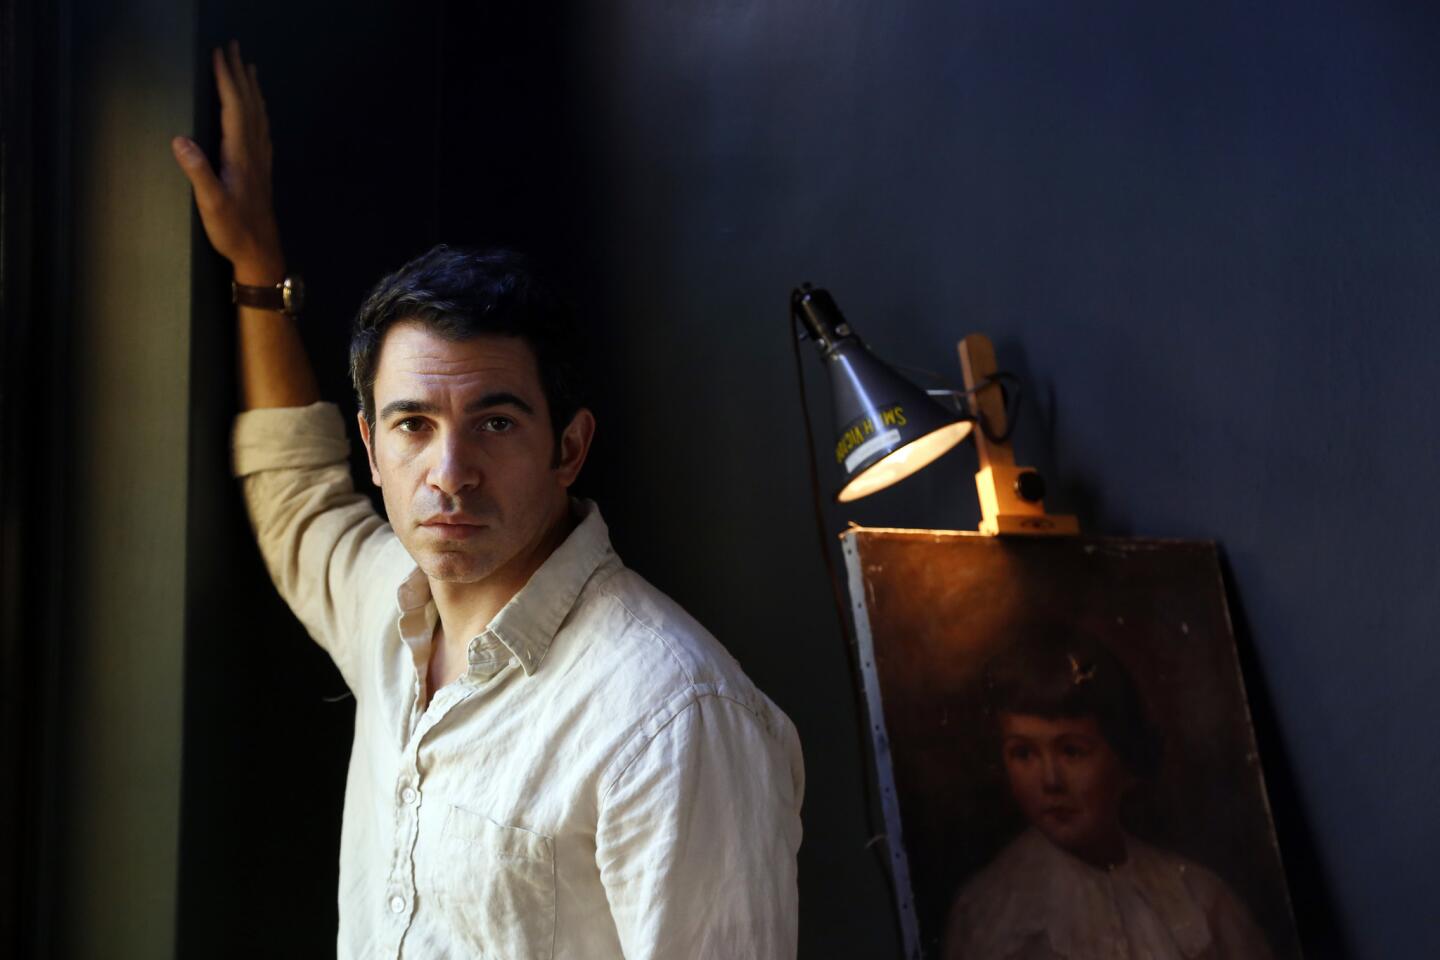 Chris Messina, who stars in "The Mindy Project" and "The Newsroom," is photographed at the Palihouse Santa Monica hotel in Santa Monica, Calif.